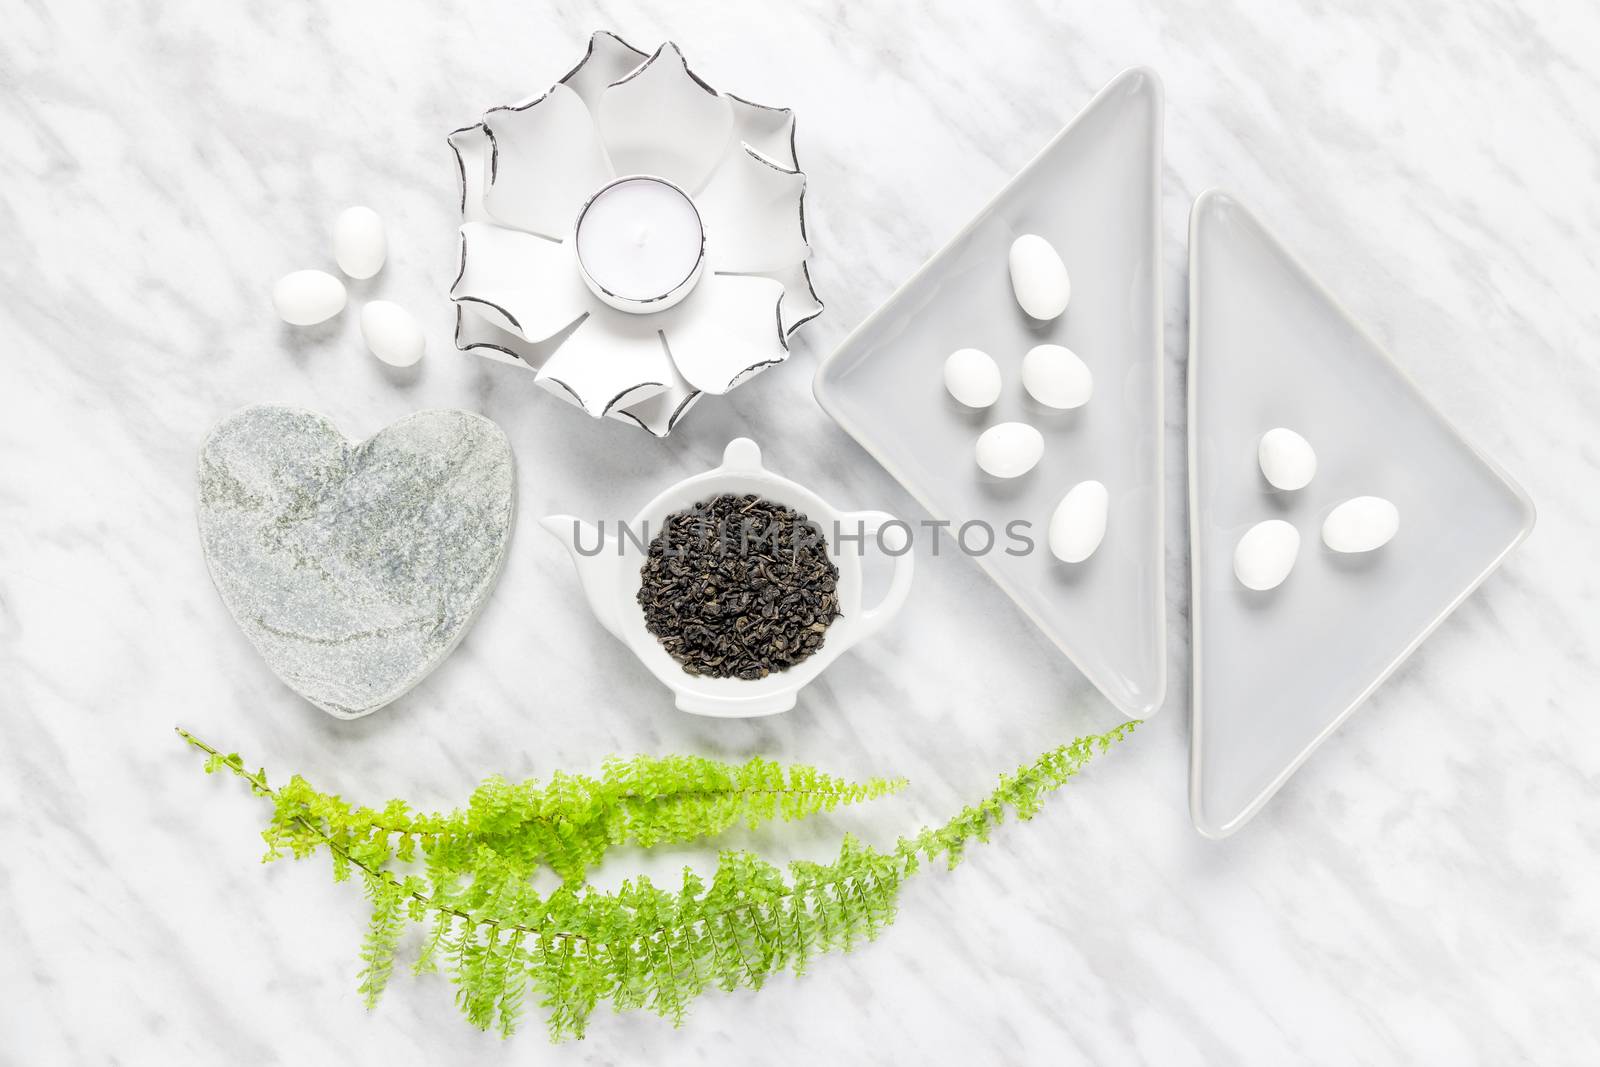 Green tea leaves, white chocolate and home decor styling by anikasalsera